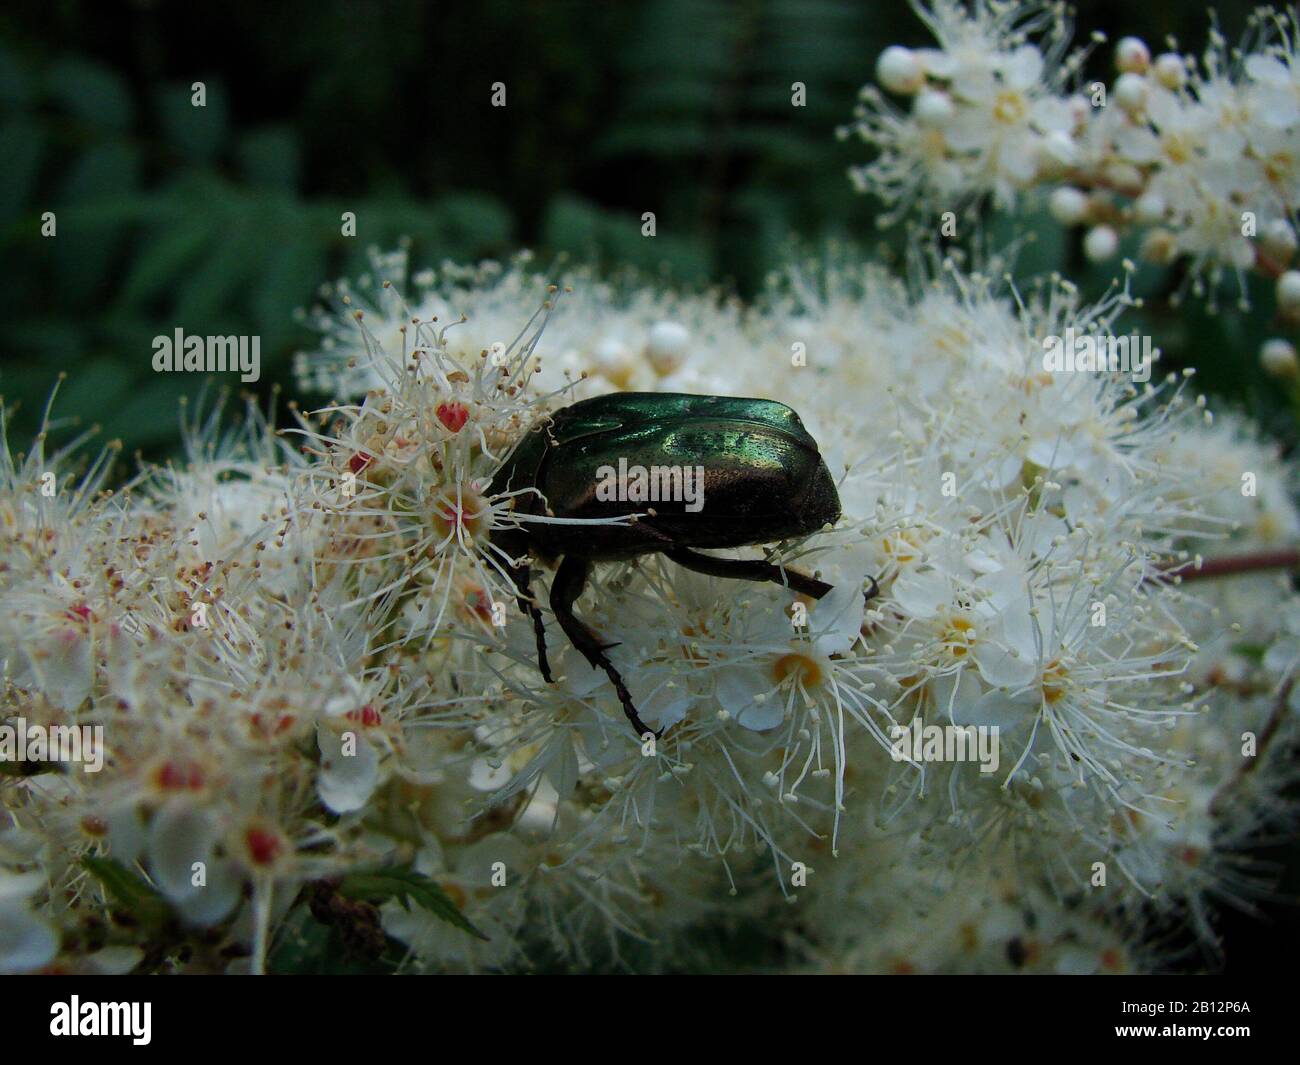 insects on blooming flowers in the garden Stock Photo